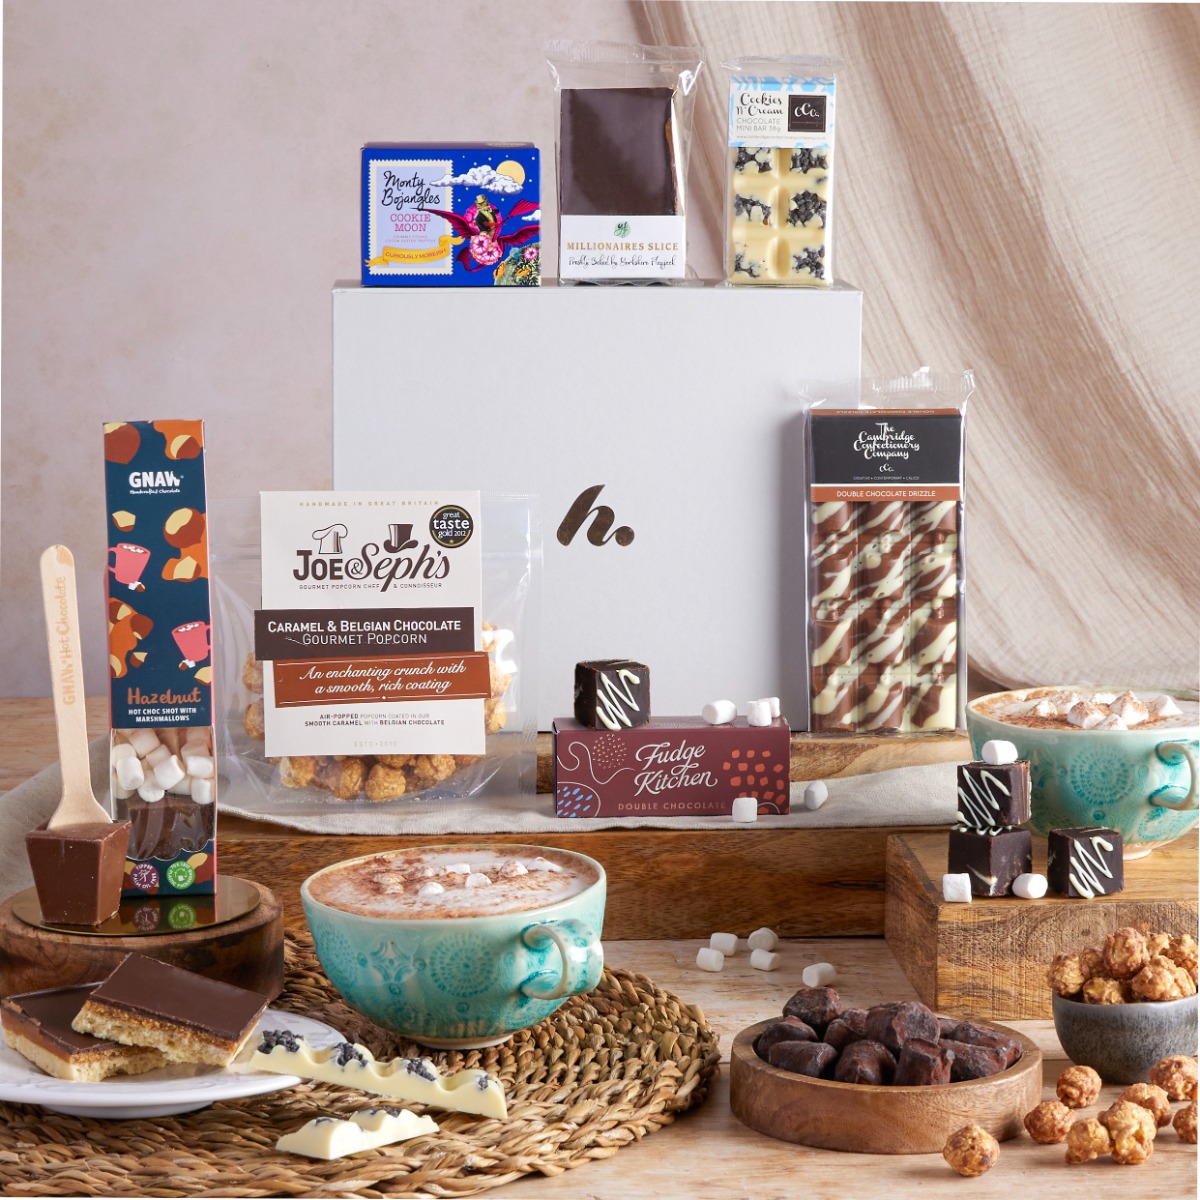 Gourmet Chocolate Lovers Hamper with contents on display